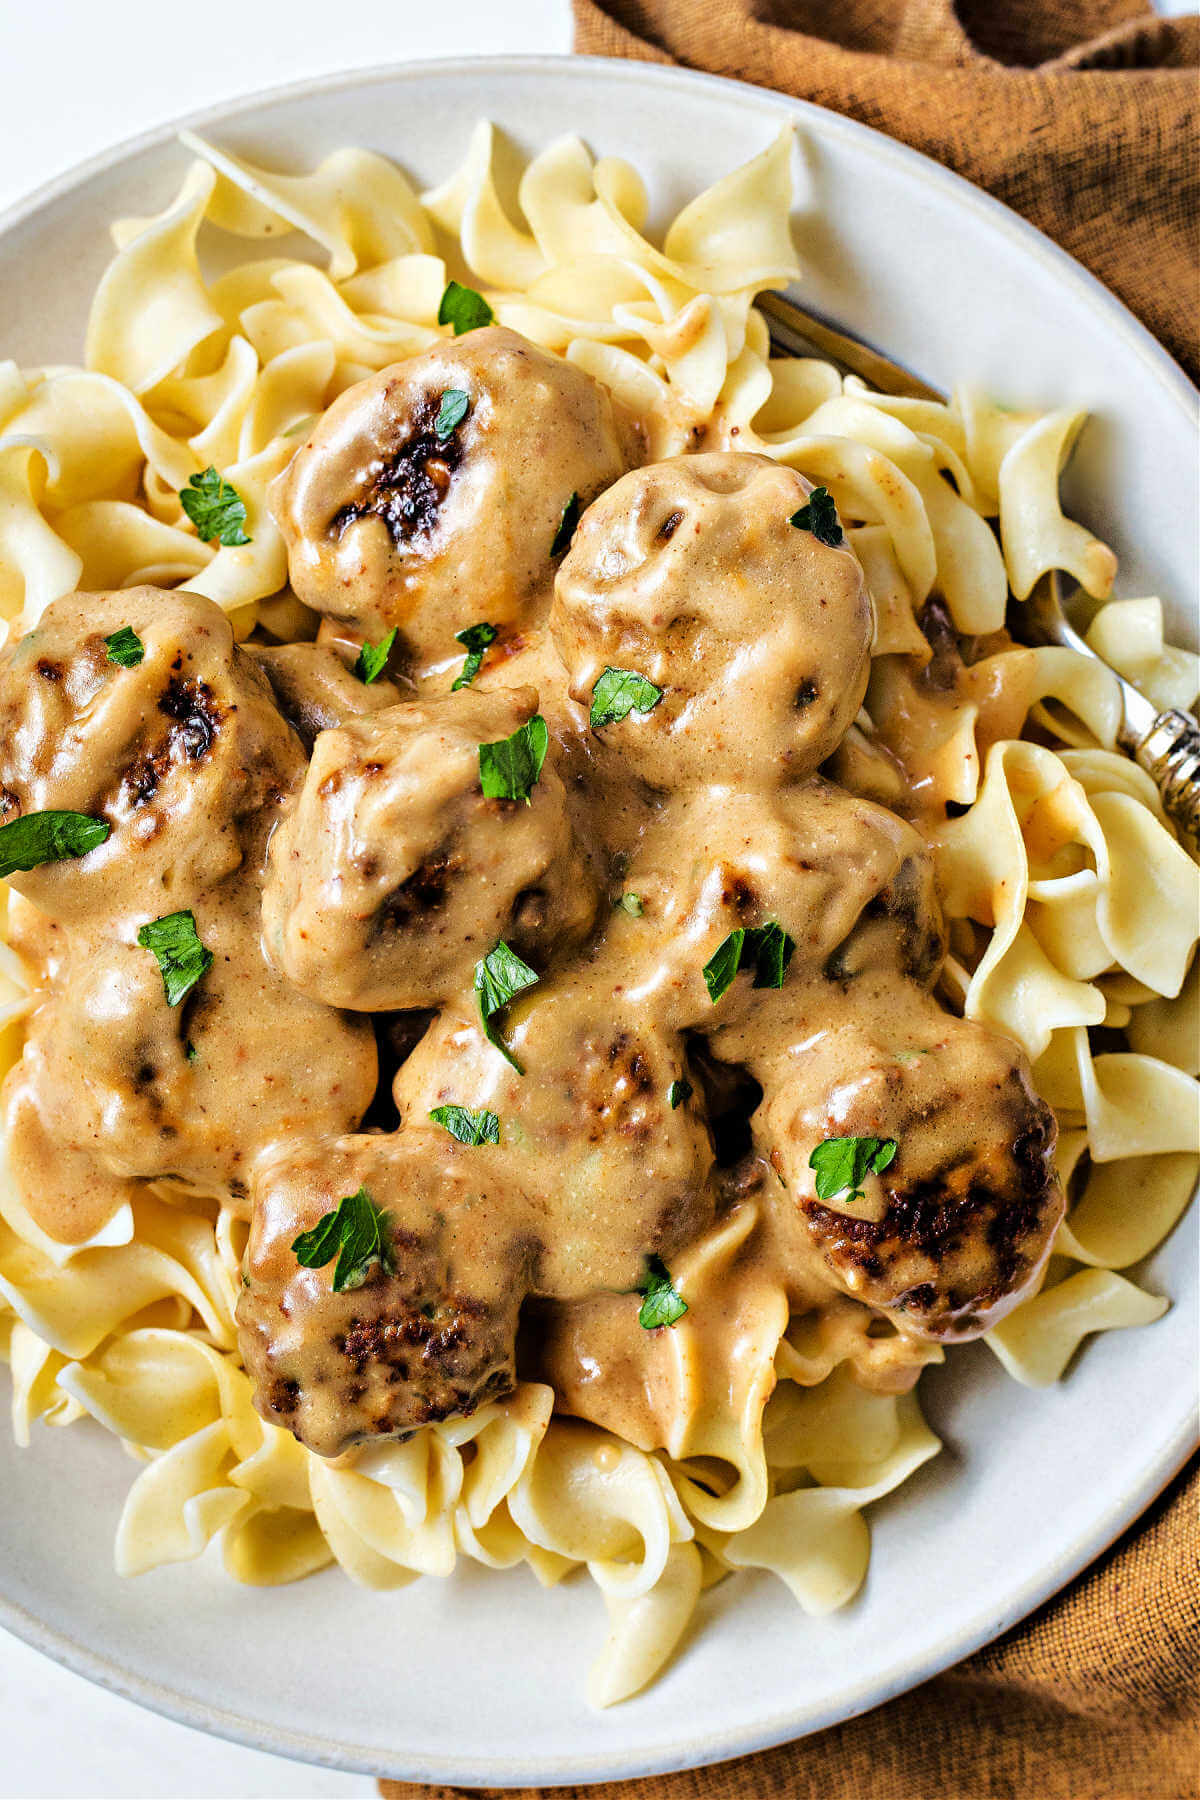 Swedish meatballs with gravy over a bowl of egg noodles.